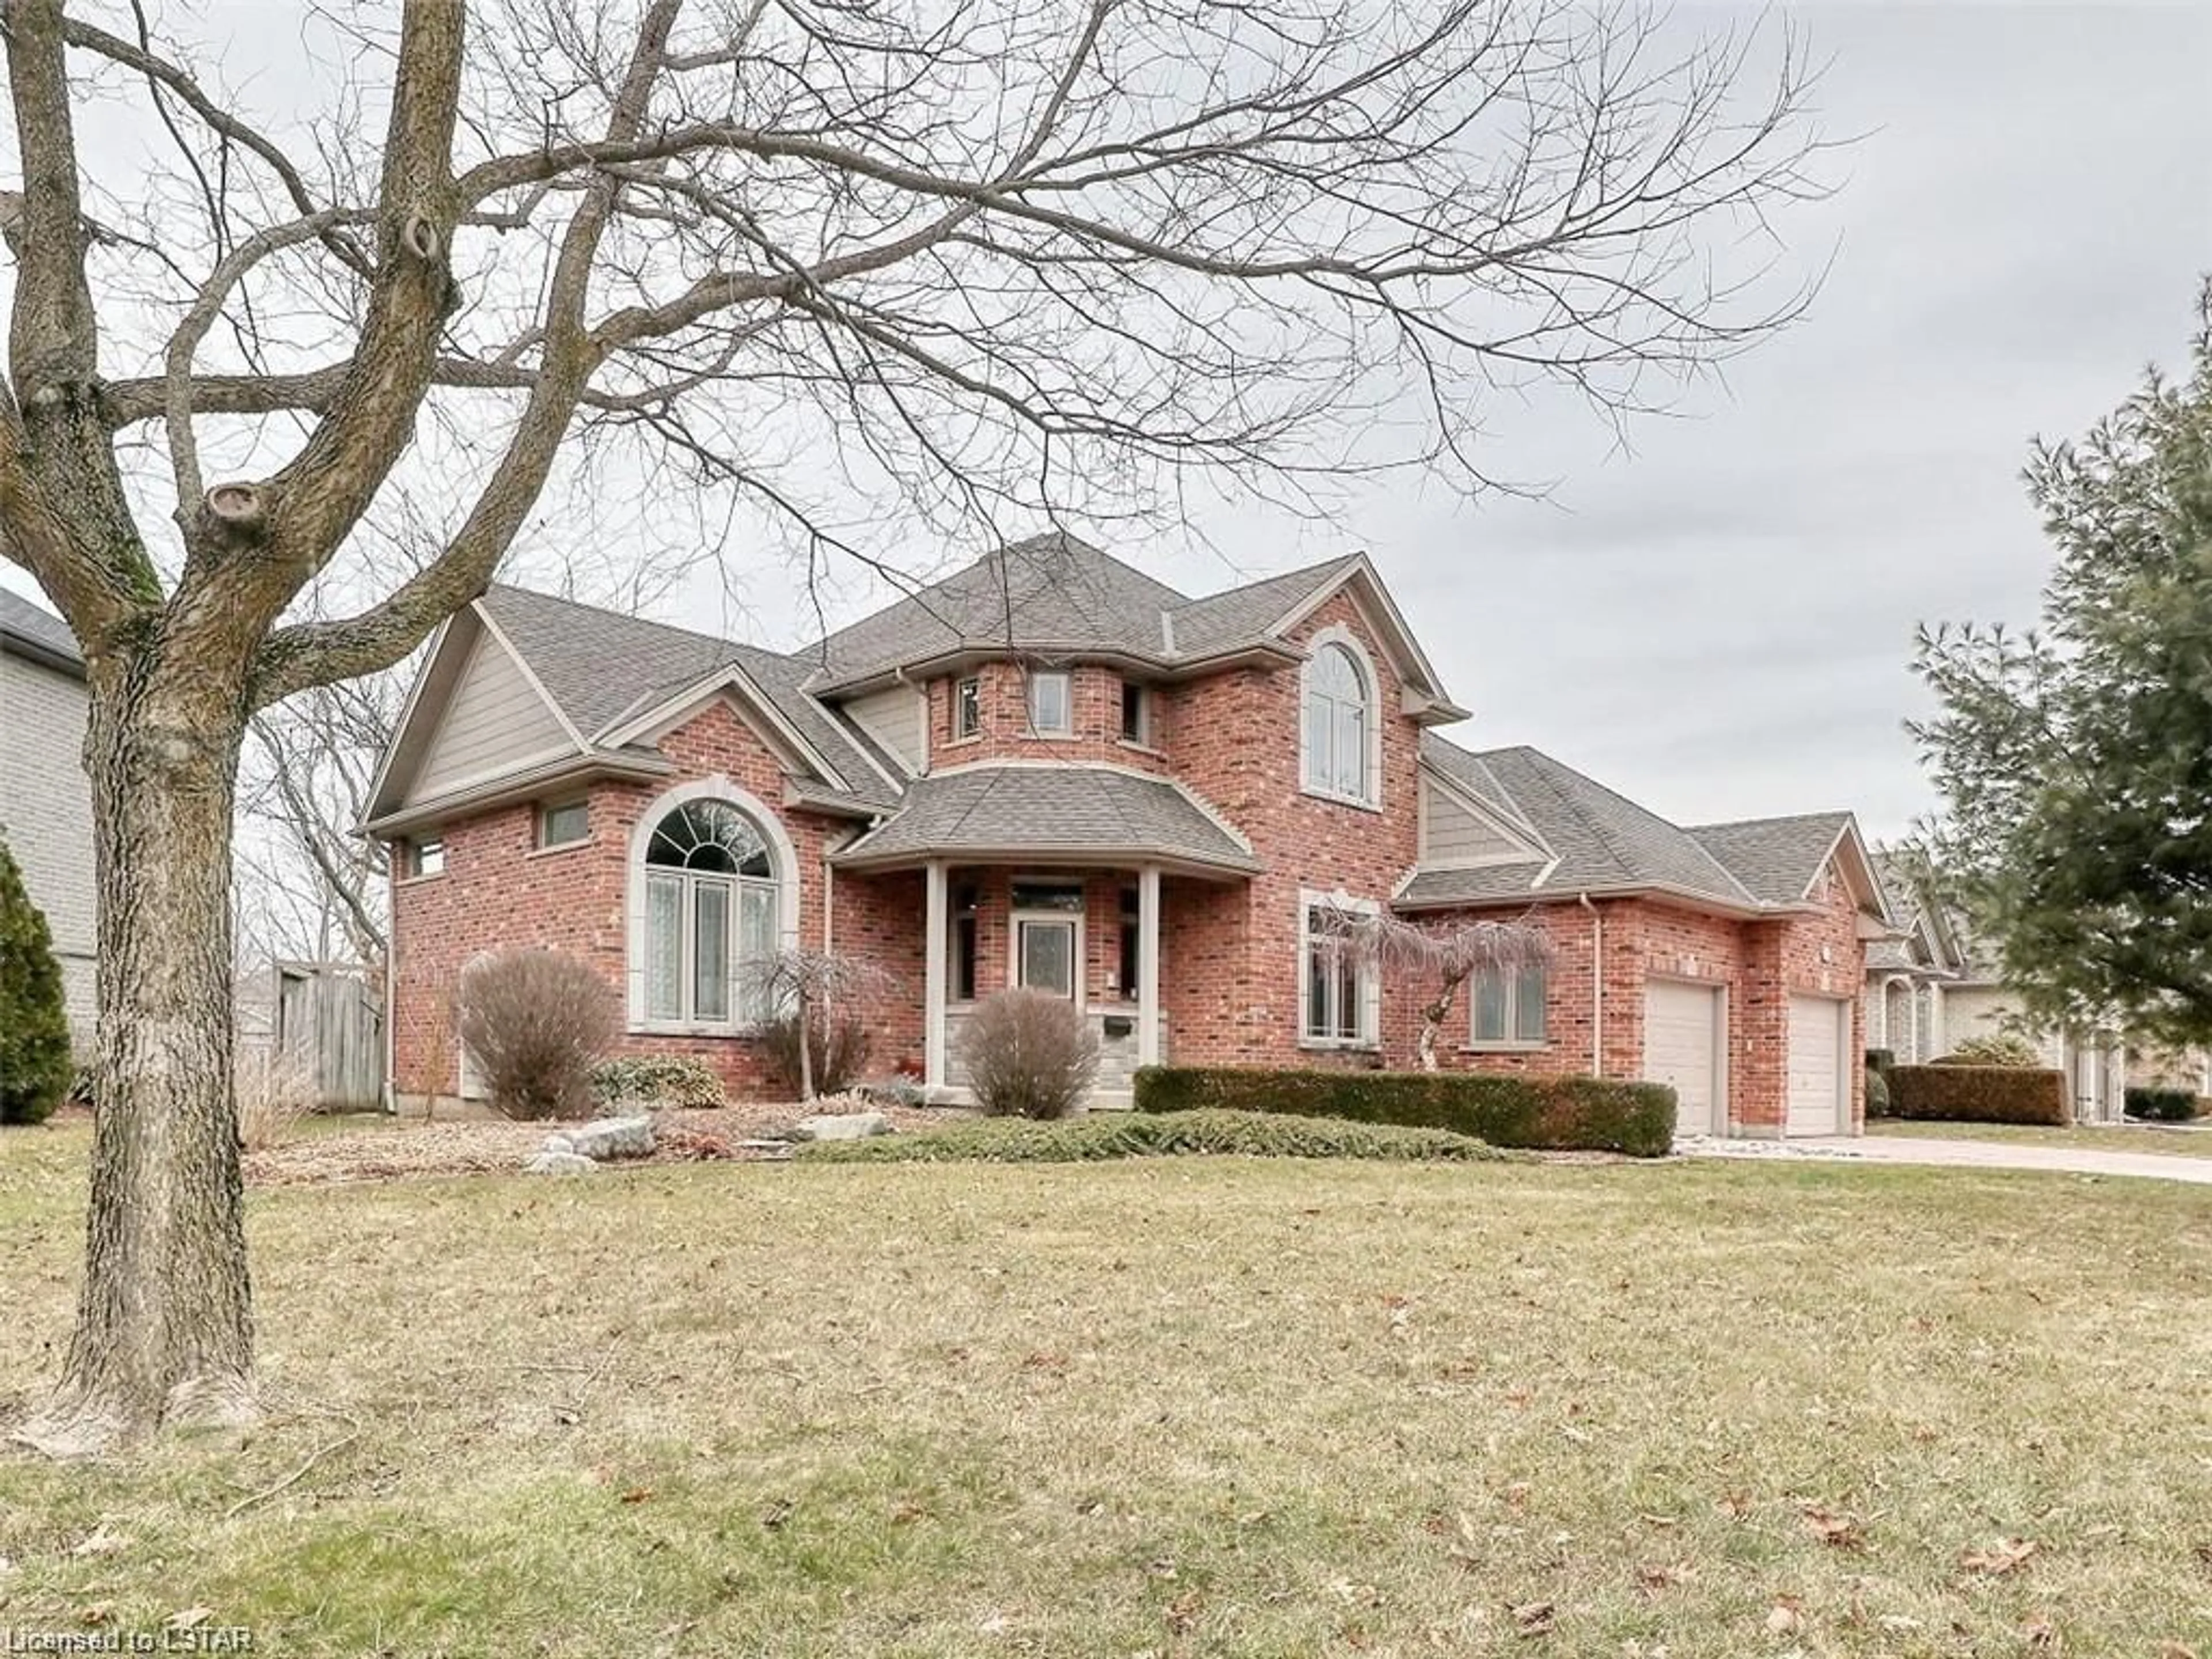 Home with brick exterior material for 4207 Masterson Cir, London Ontario N6P 1T3